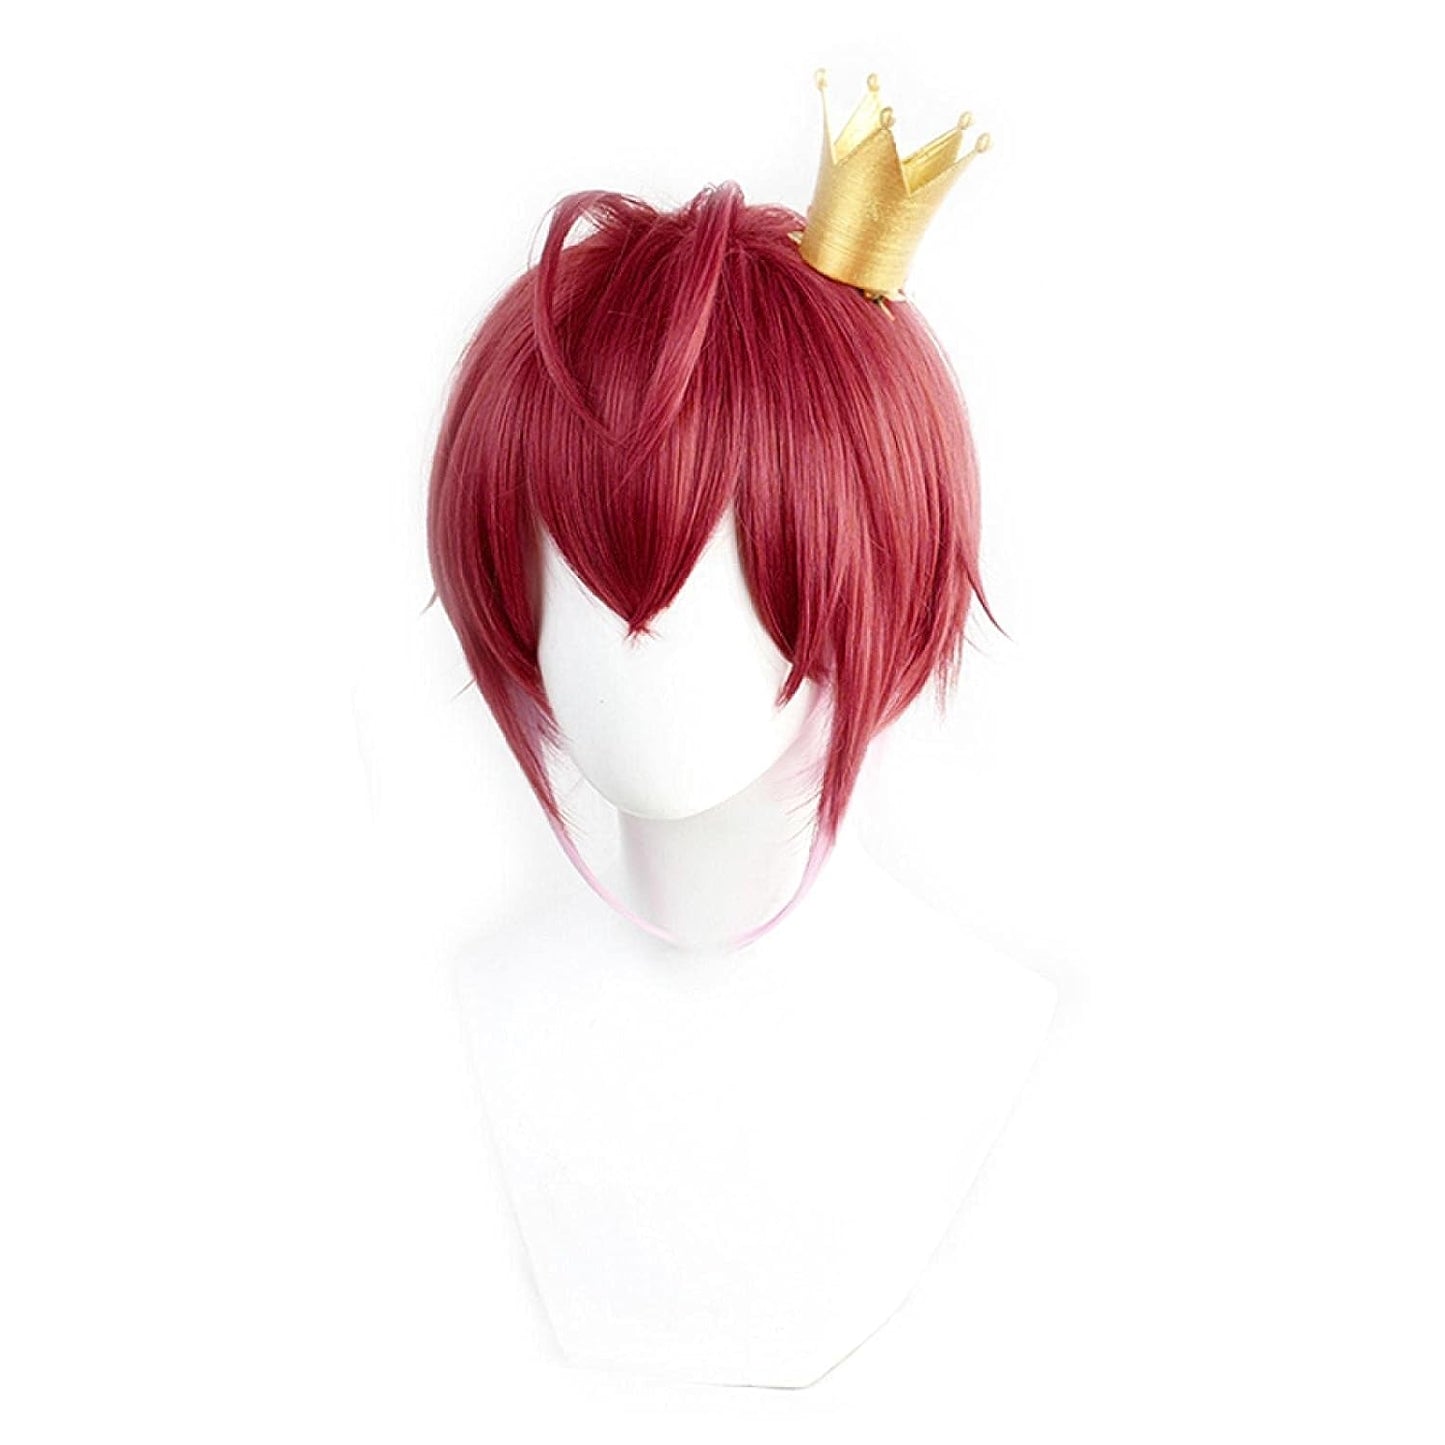 Rule the Heartslabyul Dormitory with our Riddle Rosehearts Cosplay Wig